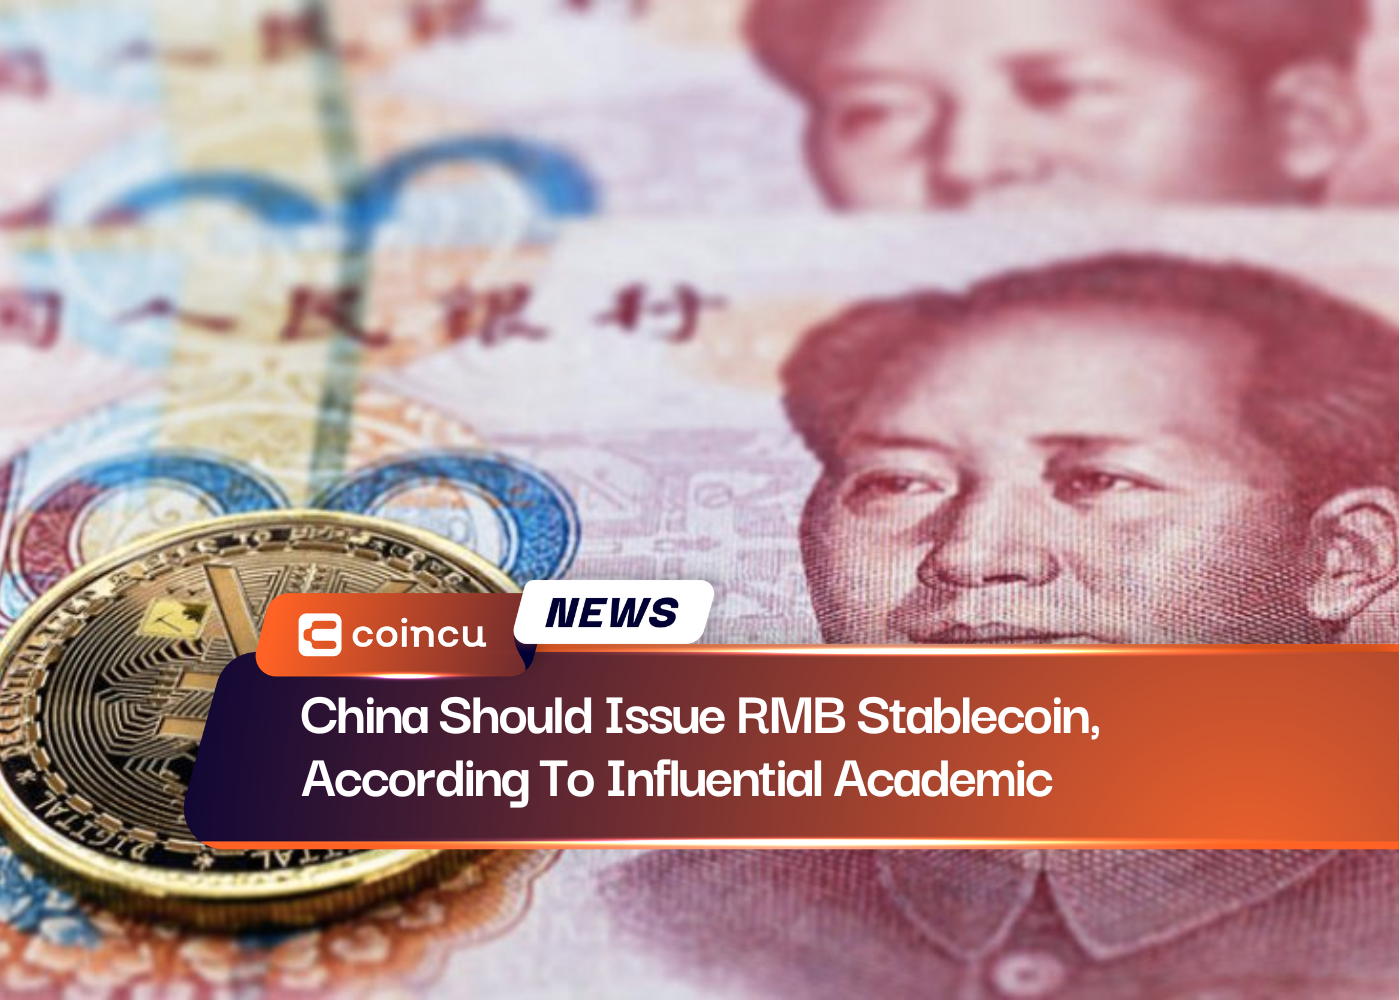 China Should Issue RMB Stablecoin, According To Influential Academic